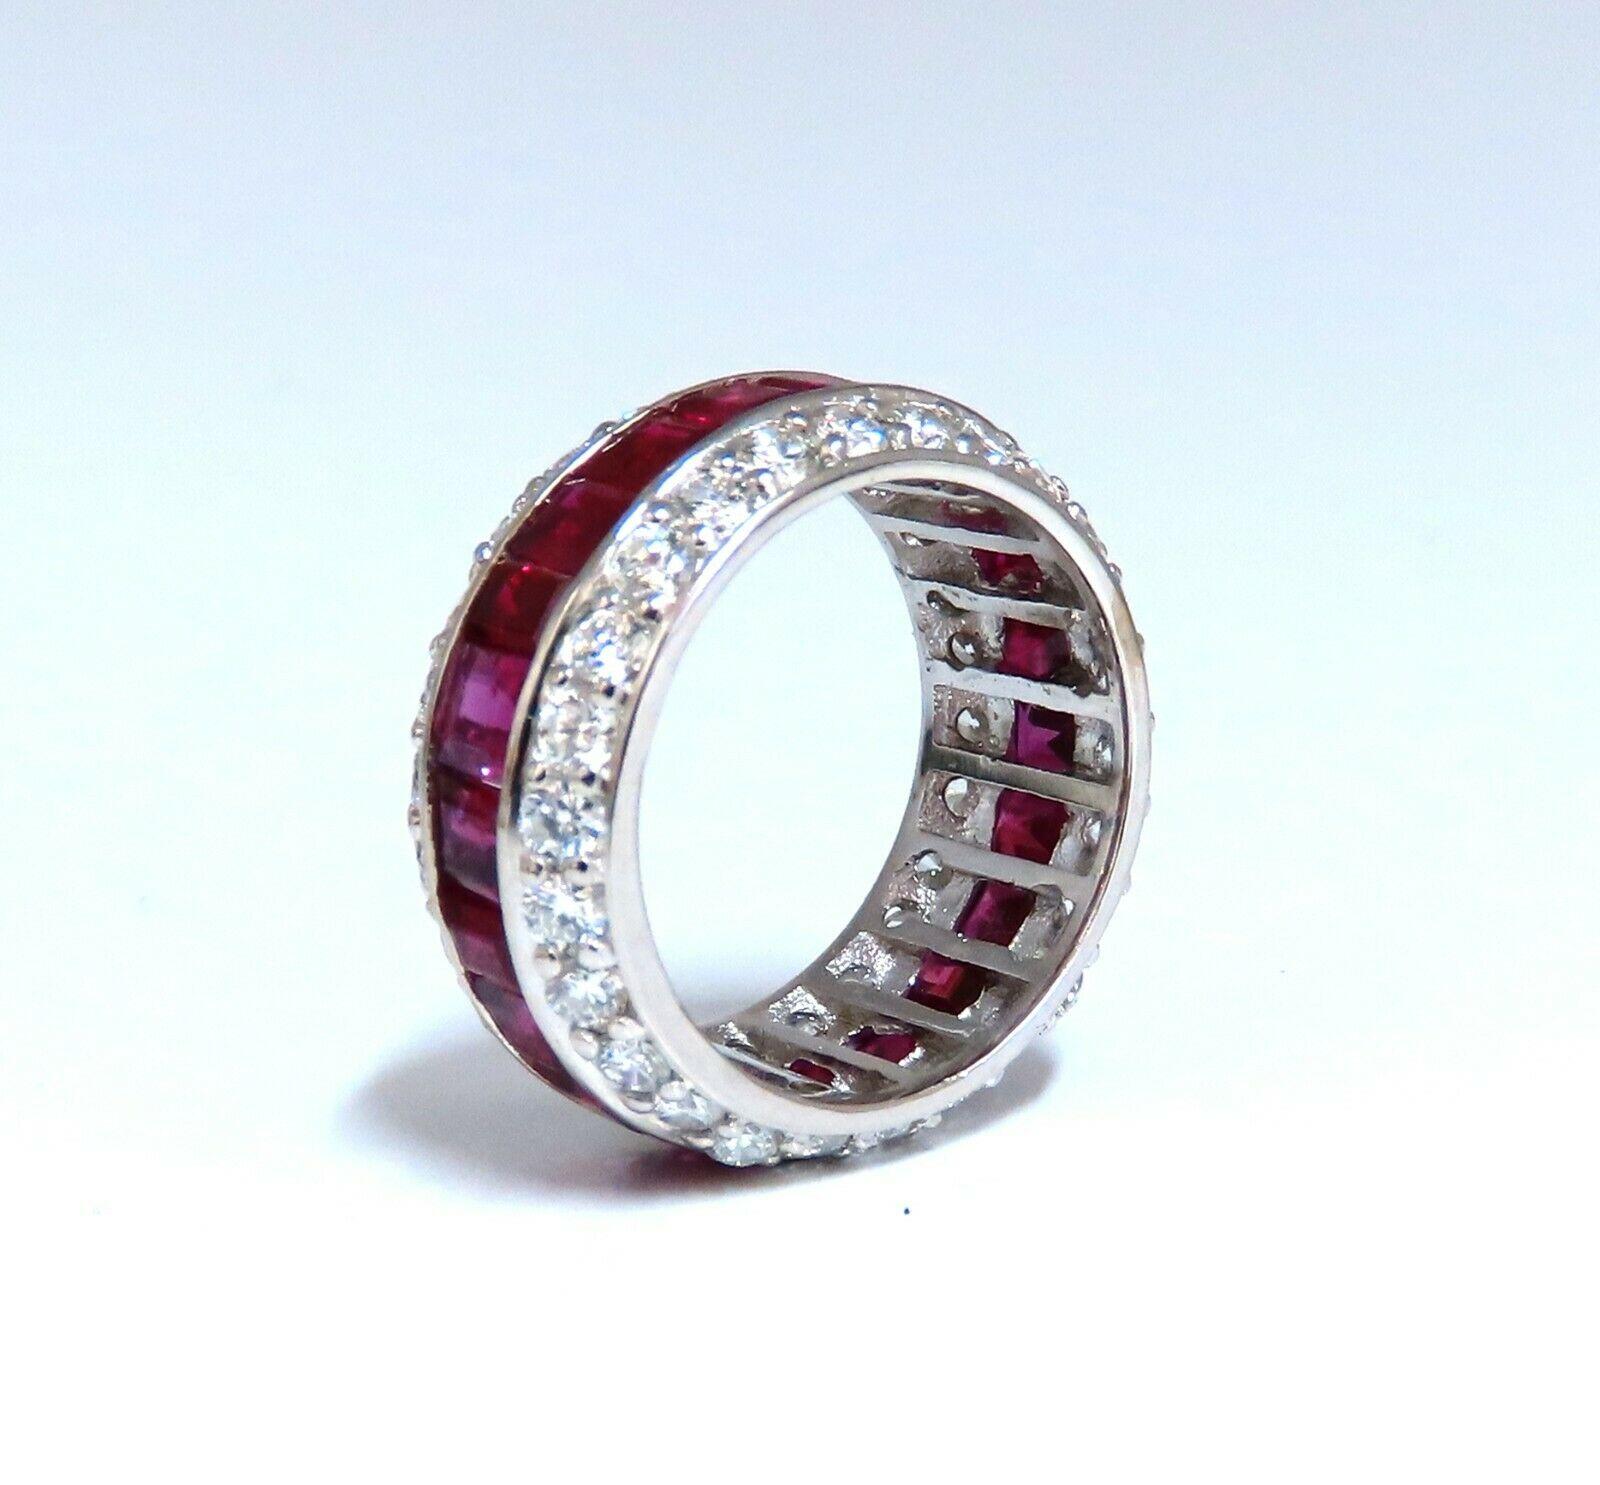 Fused Bands / Multi Row

6.40ct. Baguette cut Natural Rubies & 

 2.80ct diamonds ring.

Rubies:

Clean Clarity & full round cuts.

Transparent & Vivid red colors.

Average: 3.5mm each

 

2.80ct. natural round brilliant diamonds

G-color VS-2